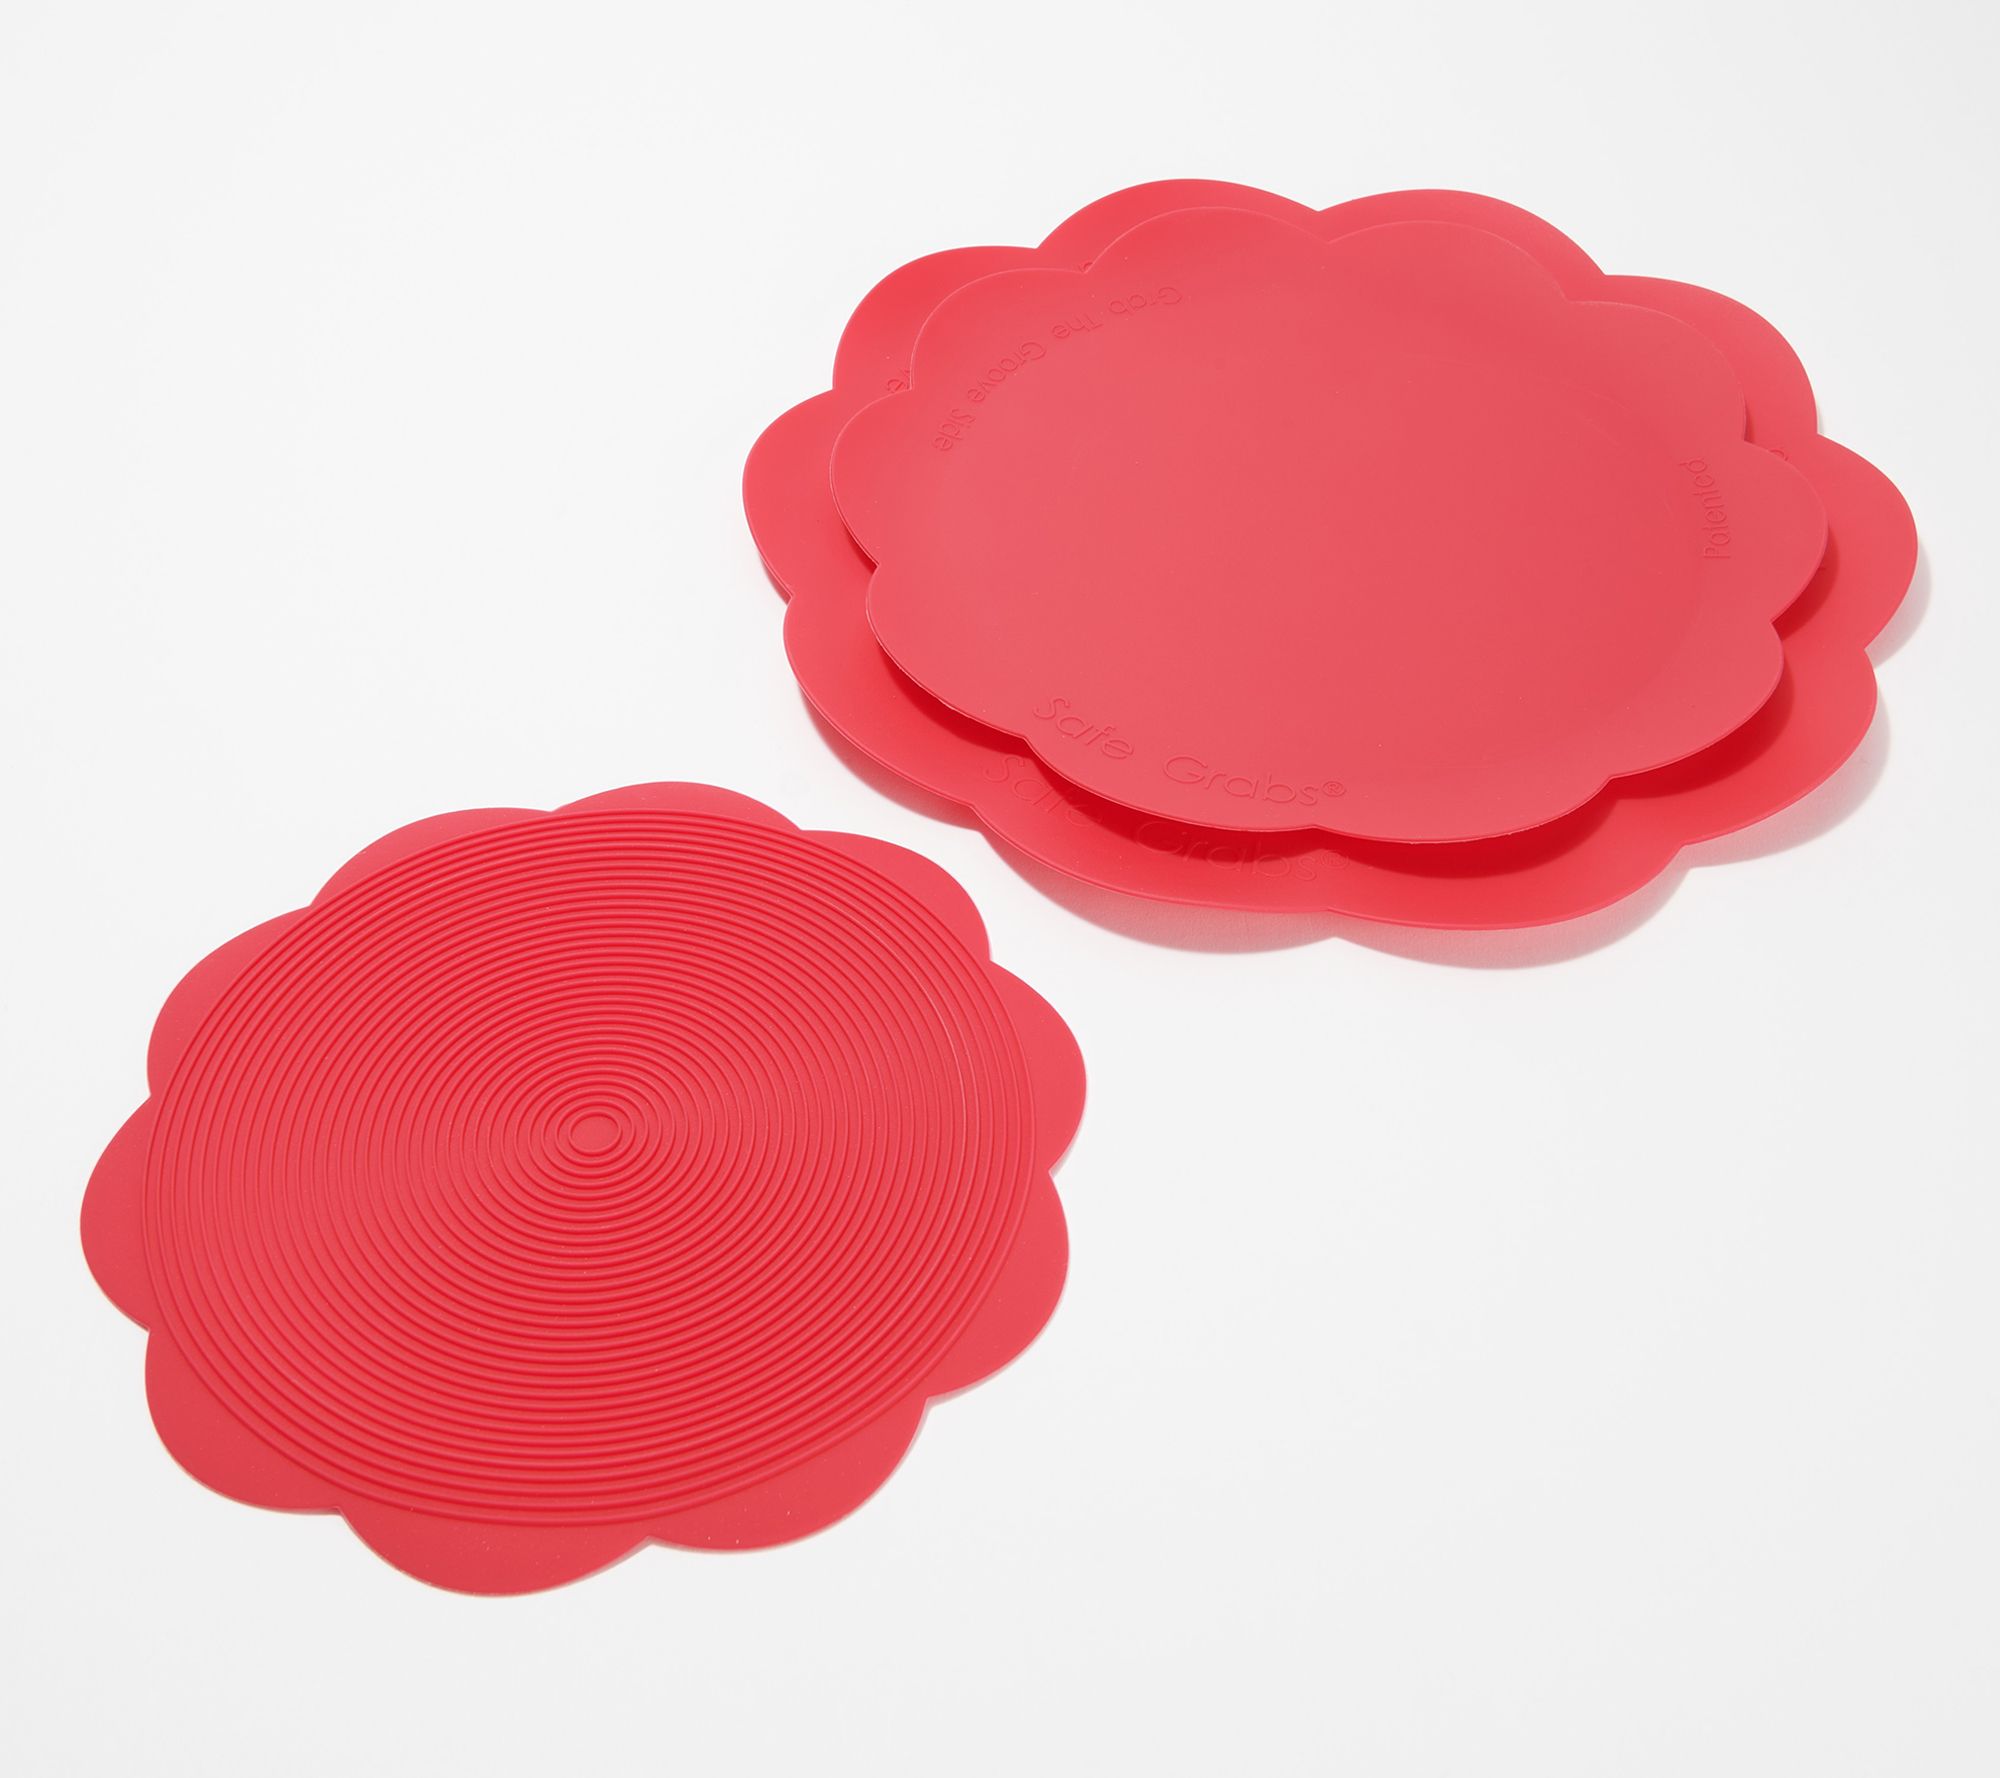 Micro Easy Grab Set of 2 8-in-1 Silicone Microwave Pads on QVC 